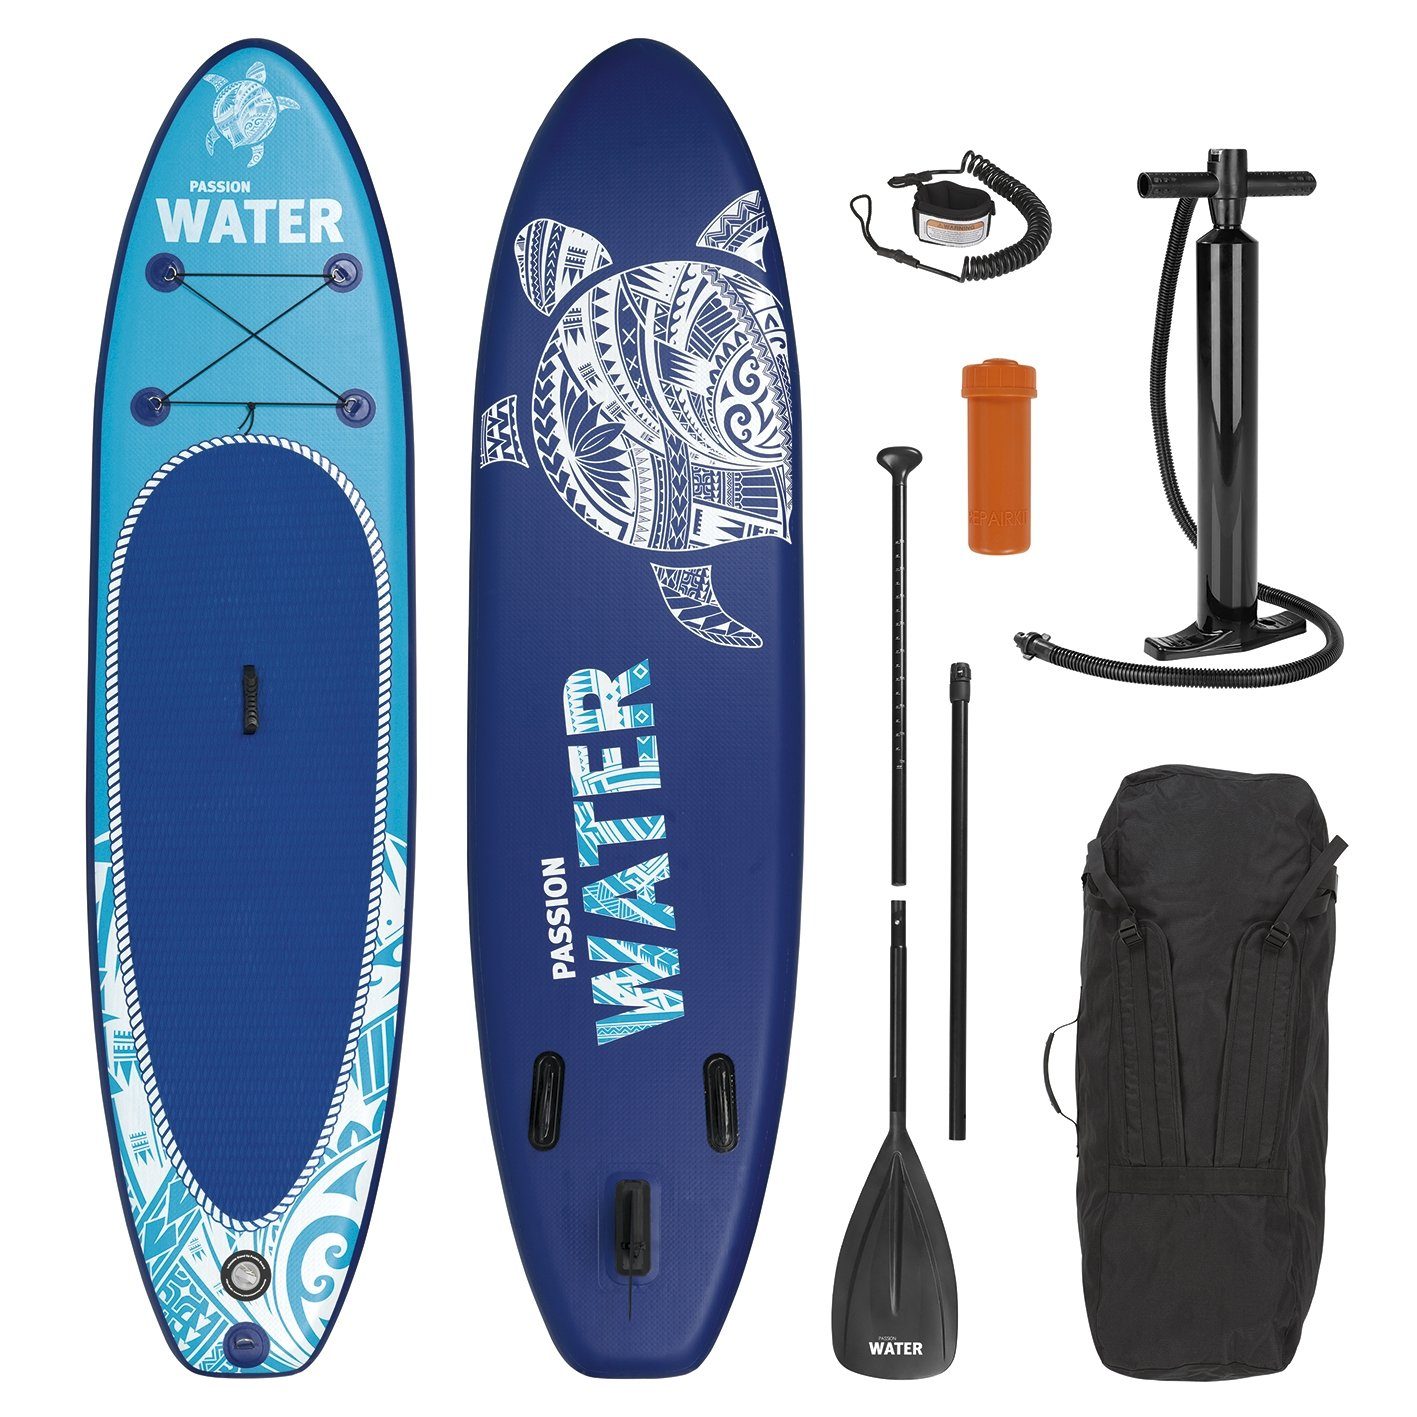 up cm, Inflatable Stand-Up Set Komplett 300 110kg, Paddle-Board Board inkl. Stand Paddel Paddle Paddling MAXXMEE blau/türkis SUP-Board, Board SUP